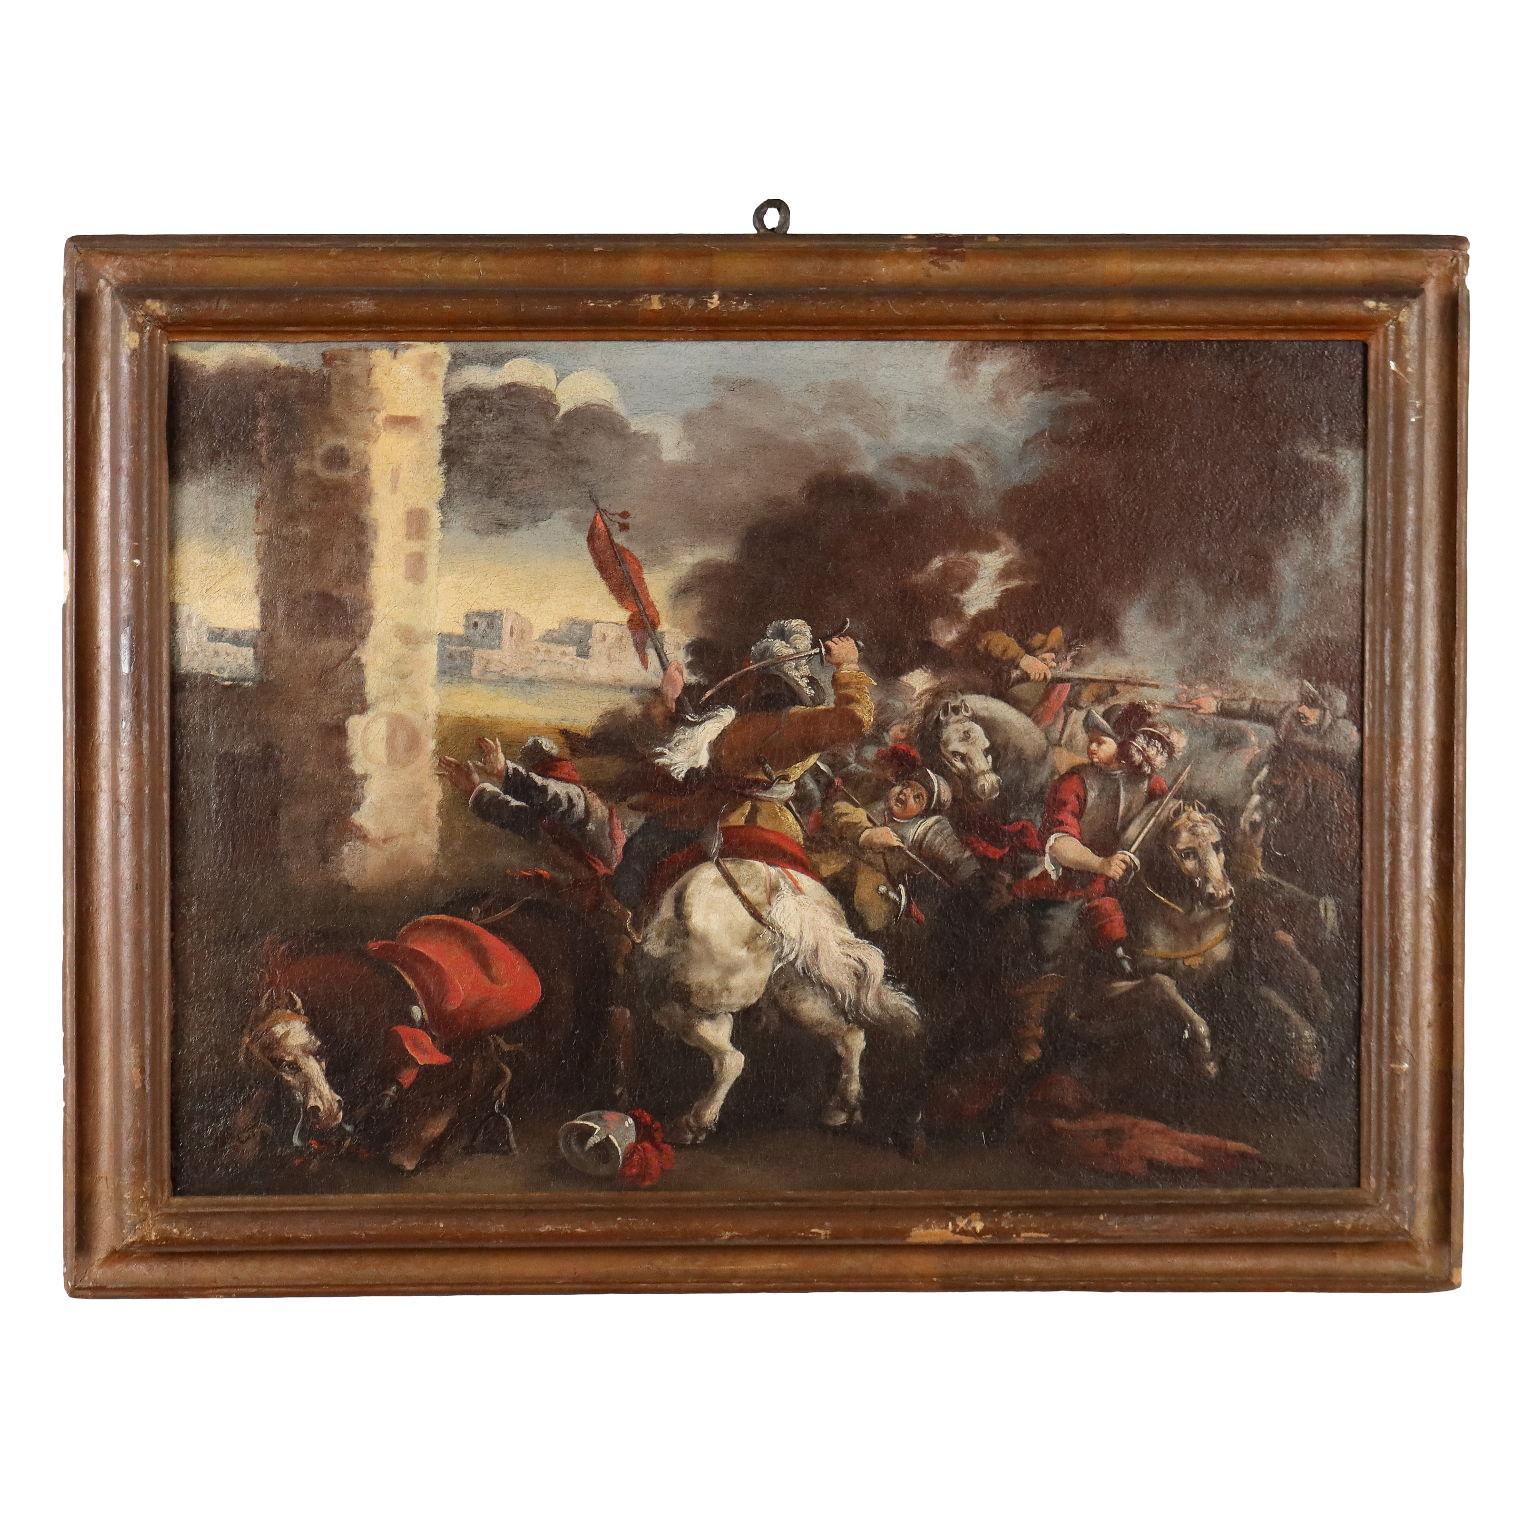 Painting with Scene of Battle 18th century